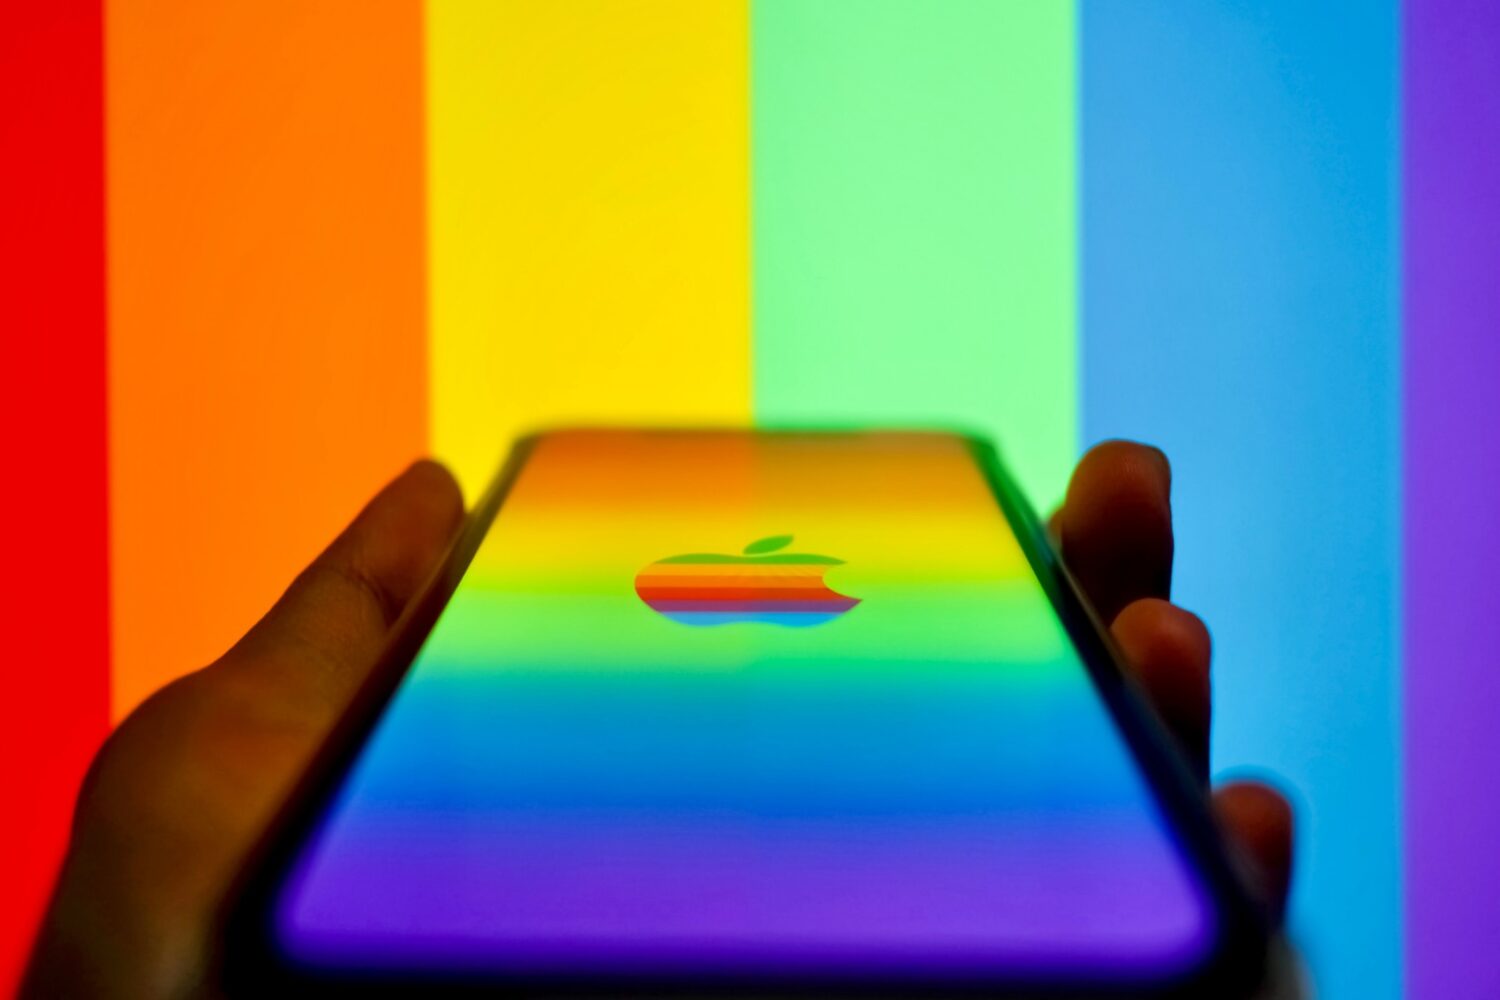 And holding iPhone displaying a rainbow Apple logo on the screen, set against rainbow stripes in the background